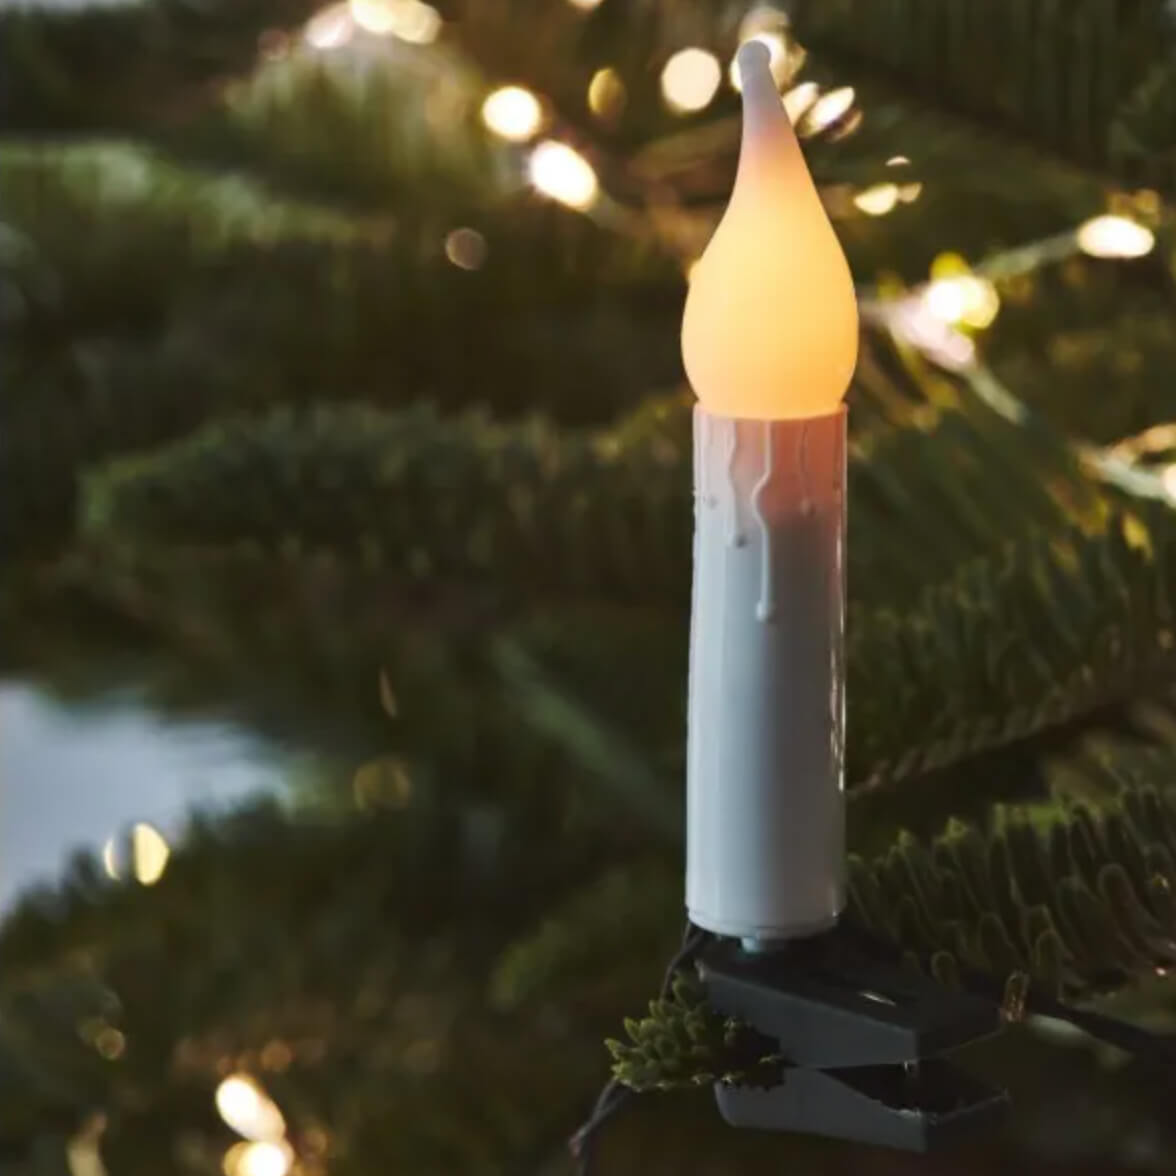 An individual Clip on candle fairy light Christmas lights seen on a tree